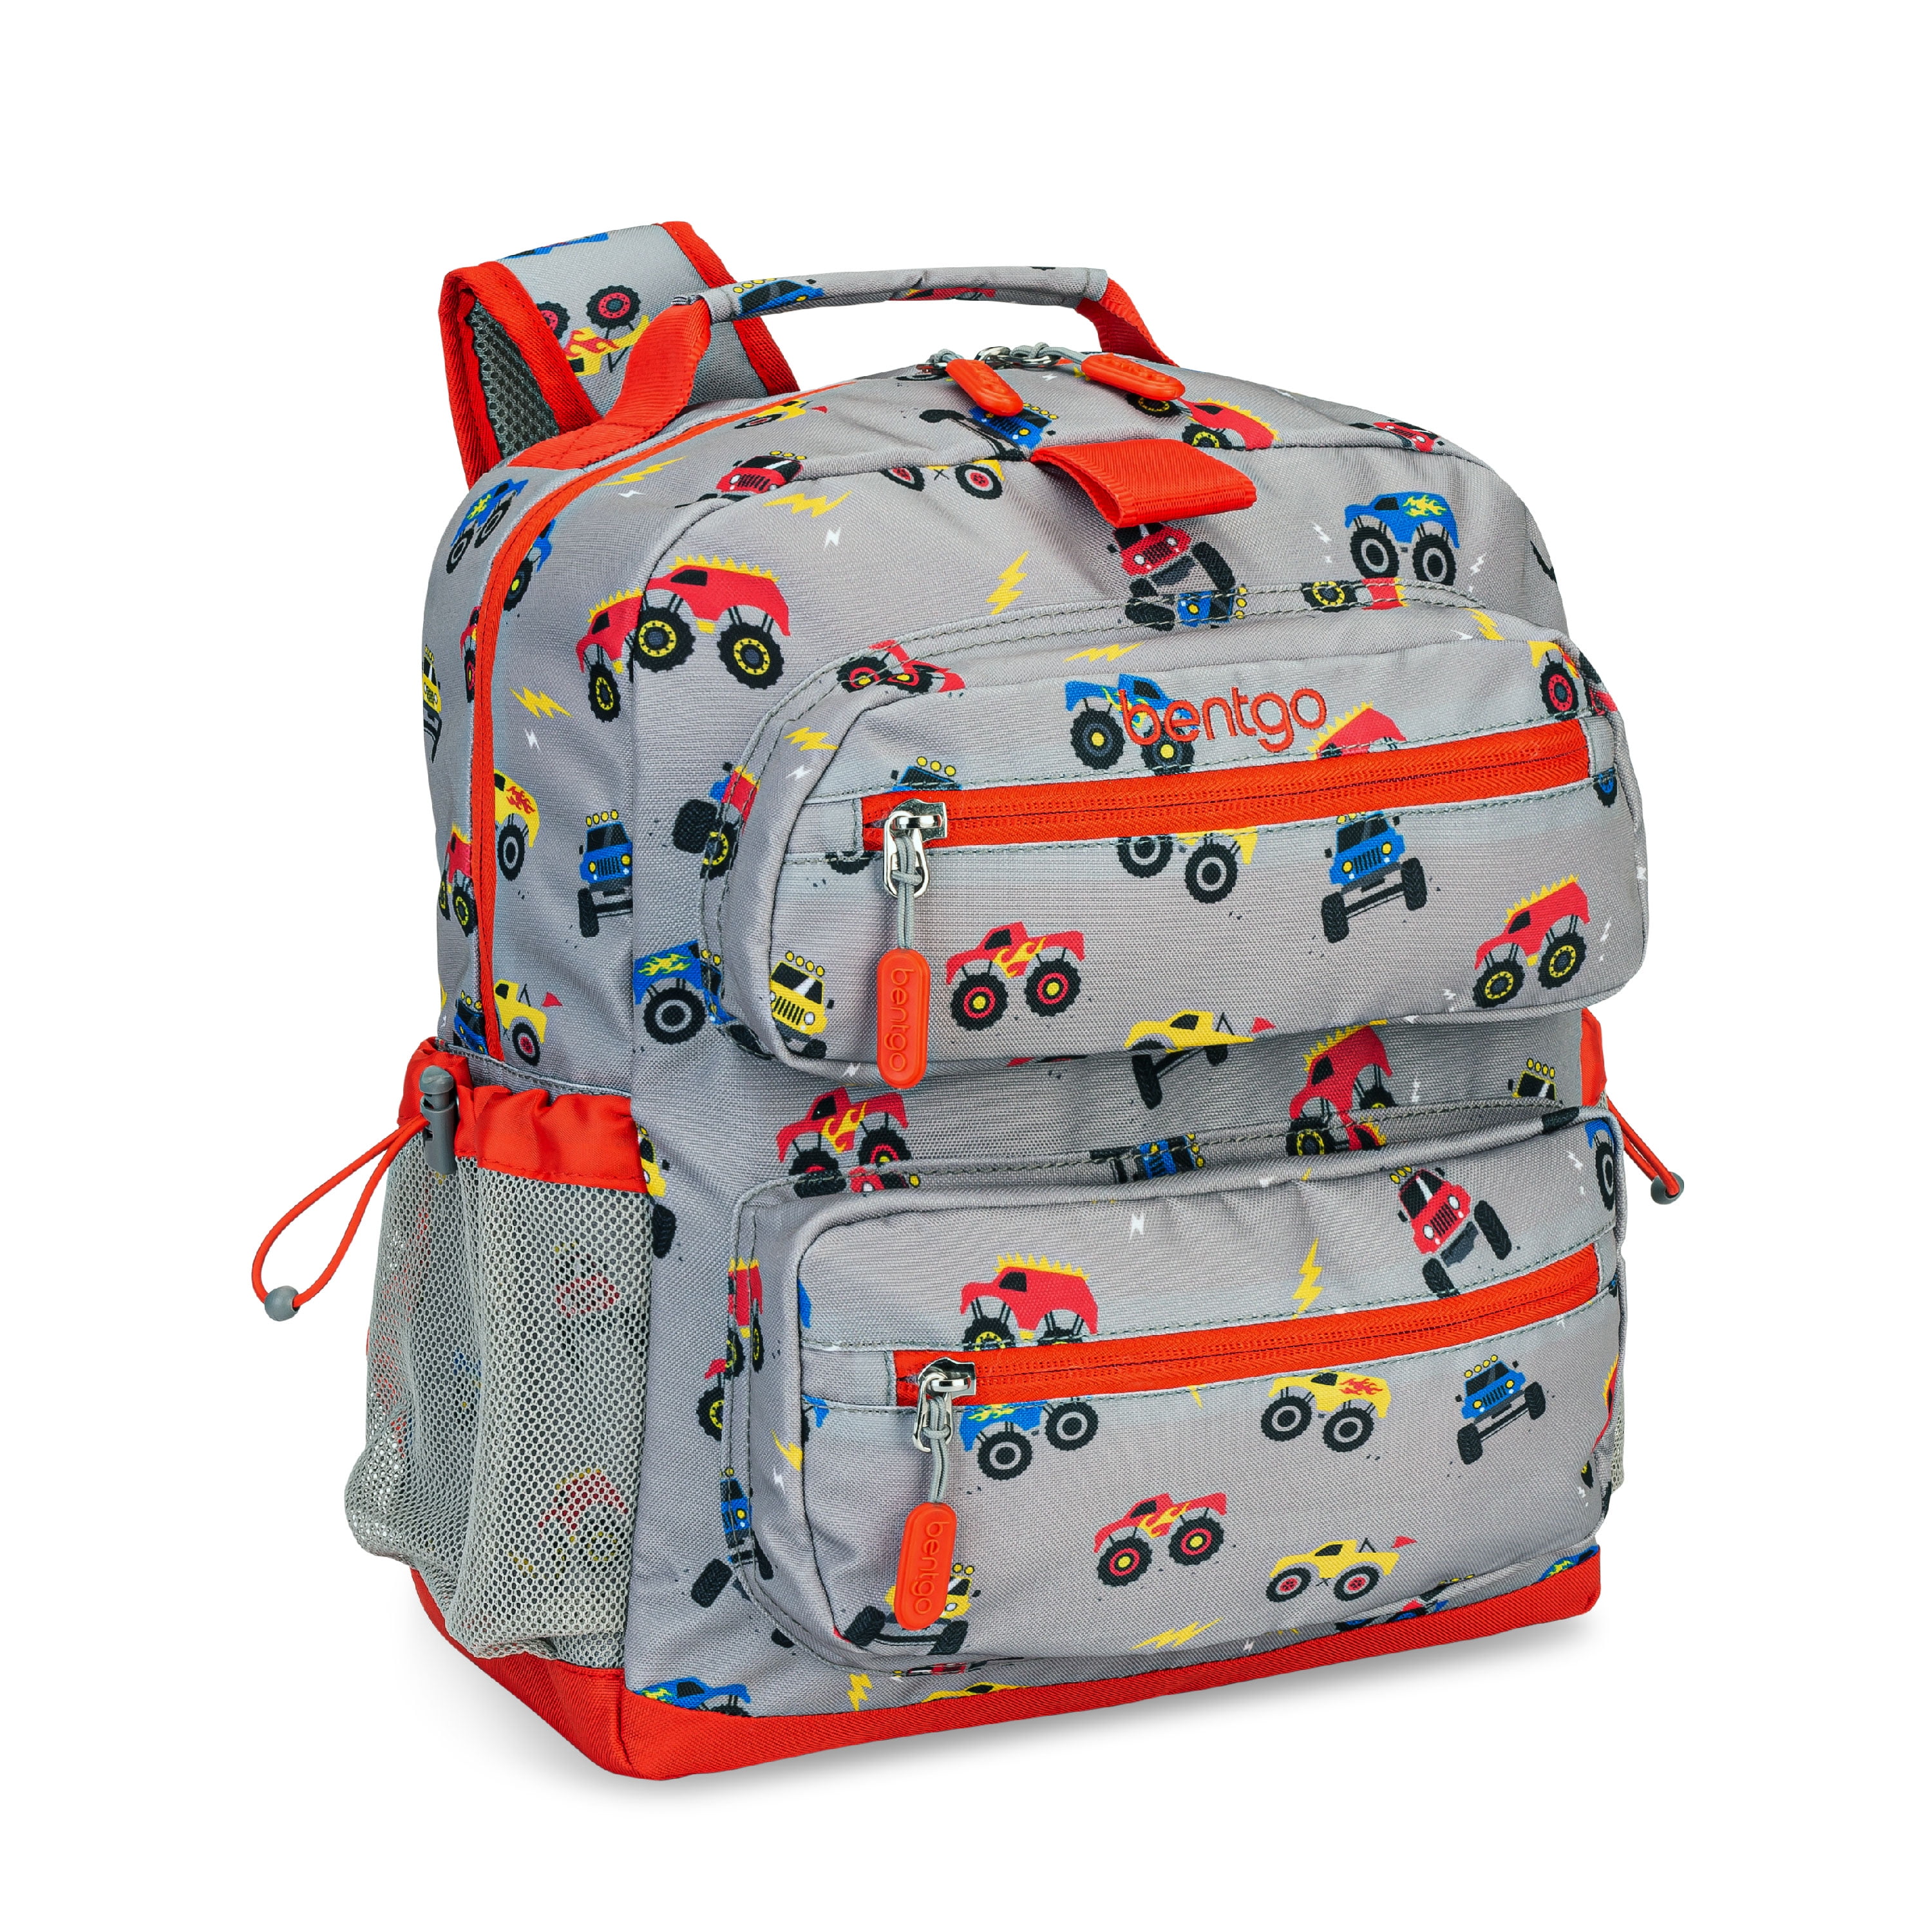  Bentgo® Kids Backpack - Lightweight 14” Backpack in Unique  Prints for School, Travel, & Daycare - Roomy Interior, Durable &  Water-Resistant Fabric, & Loop for Lunch Bag (Trucks)